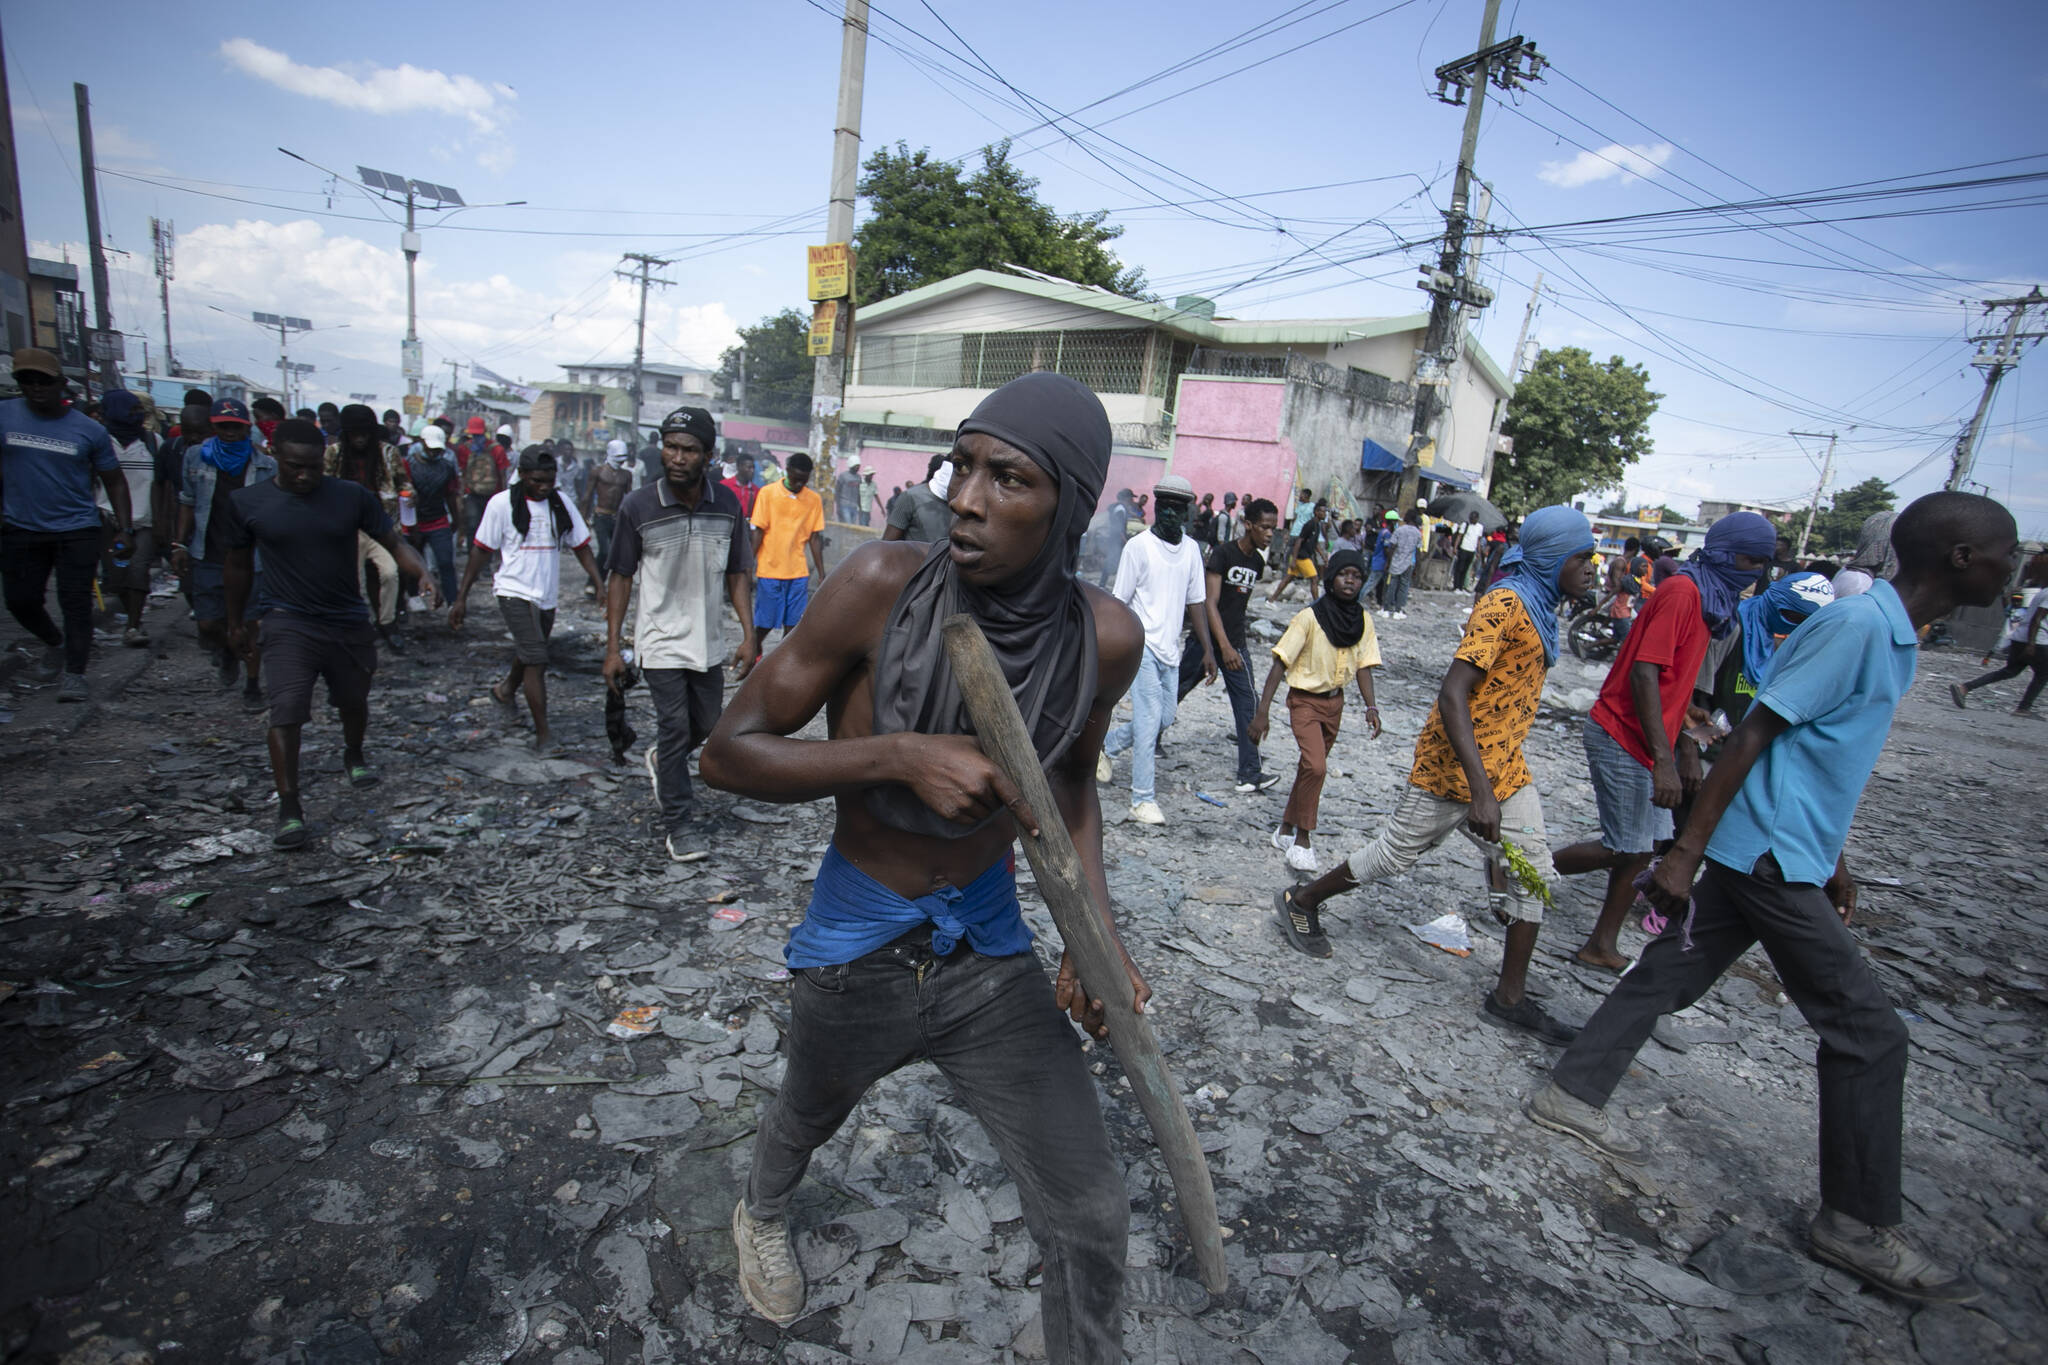 A protester carries a piece of wood simulating a weapon during a protest demanding the resignation of Prime Minister Ariel Henry in the Petion-Ville area of Port-au-Prince, Haiti, on Oct. 3, 2022.The Canadian Armed Forces have sent armoured vehicles to Haiti that were purchased by Port-au-Prince. Foreign Affairs Minister Mélanie Joly and Defence Minister Anita Anand say the equipment will help the Haitian National Police to try containing a gang crisis.THE CANADIAN PRESS/AP-Odelyn Joseph